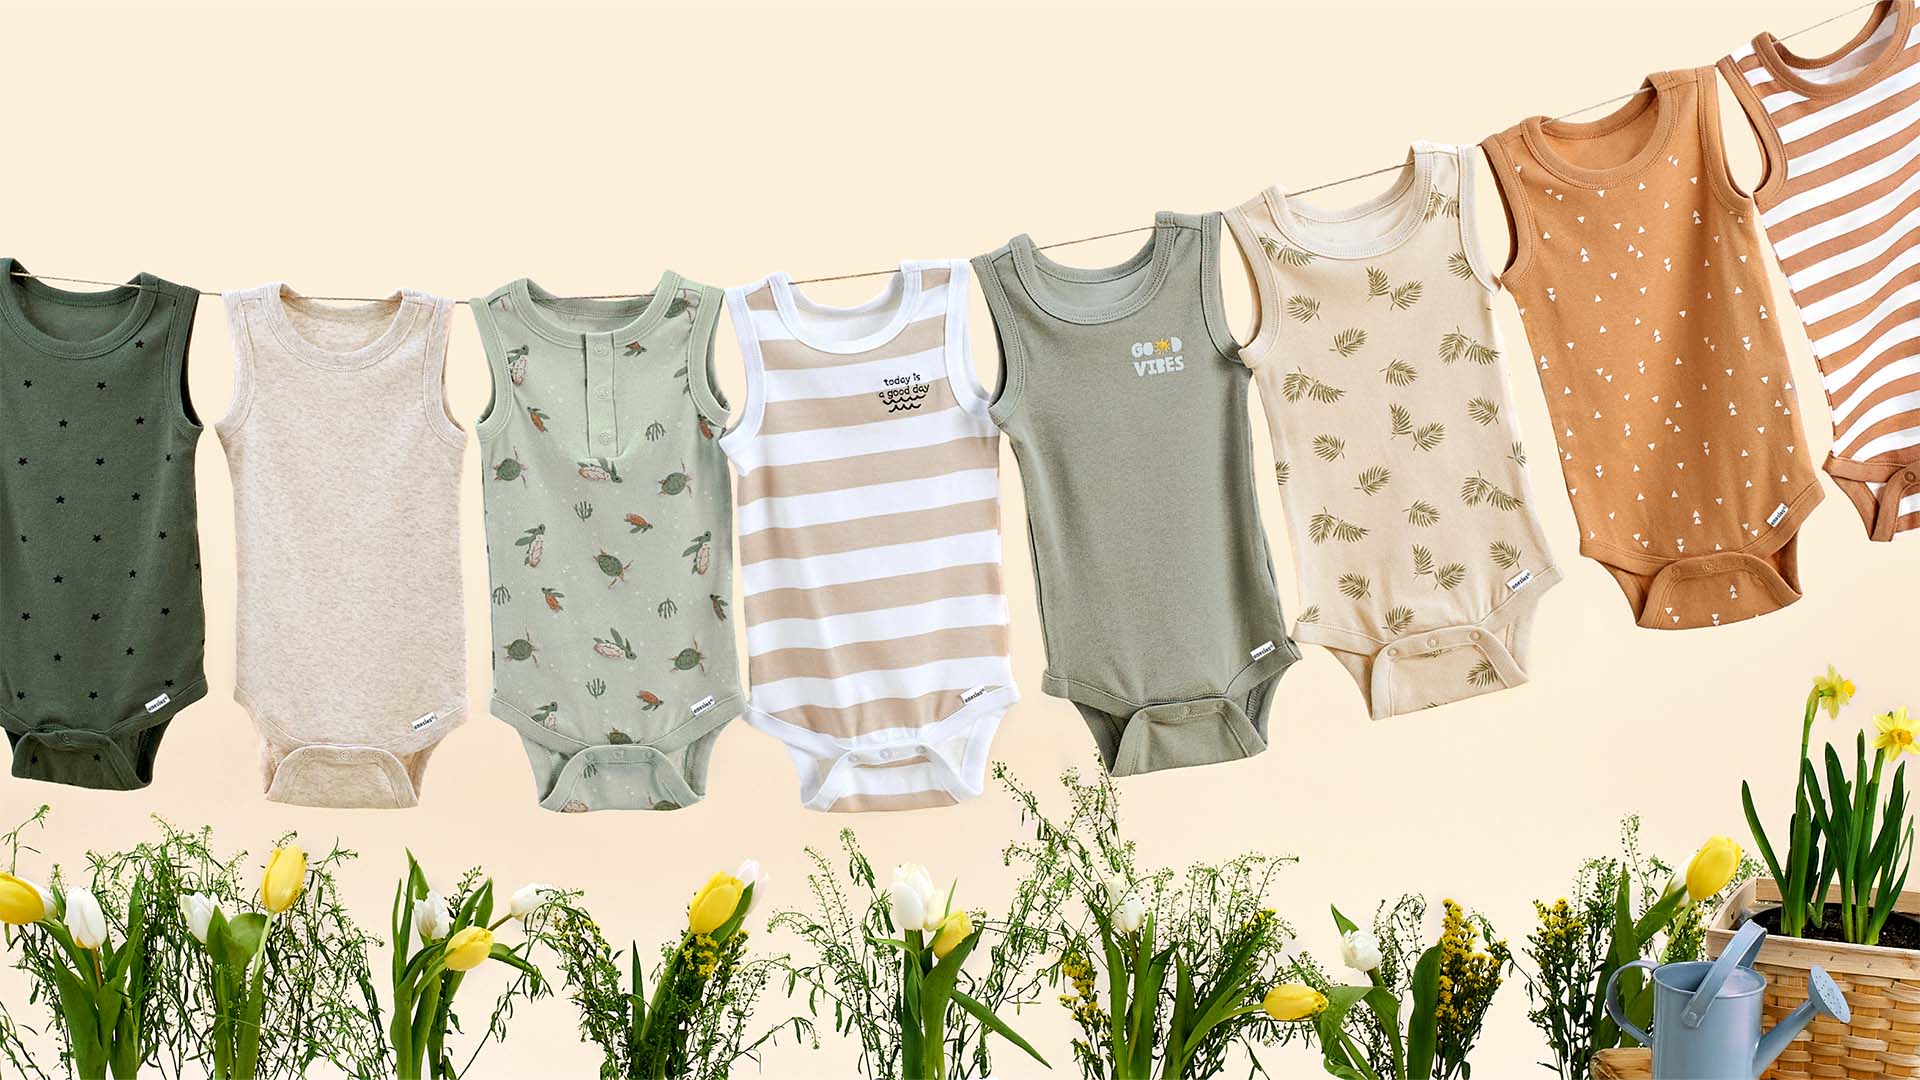 Seven baby onesies in various spring colors and patterns hanging on a line, with a background of spring flowers and a light yellow backdrop.